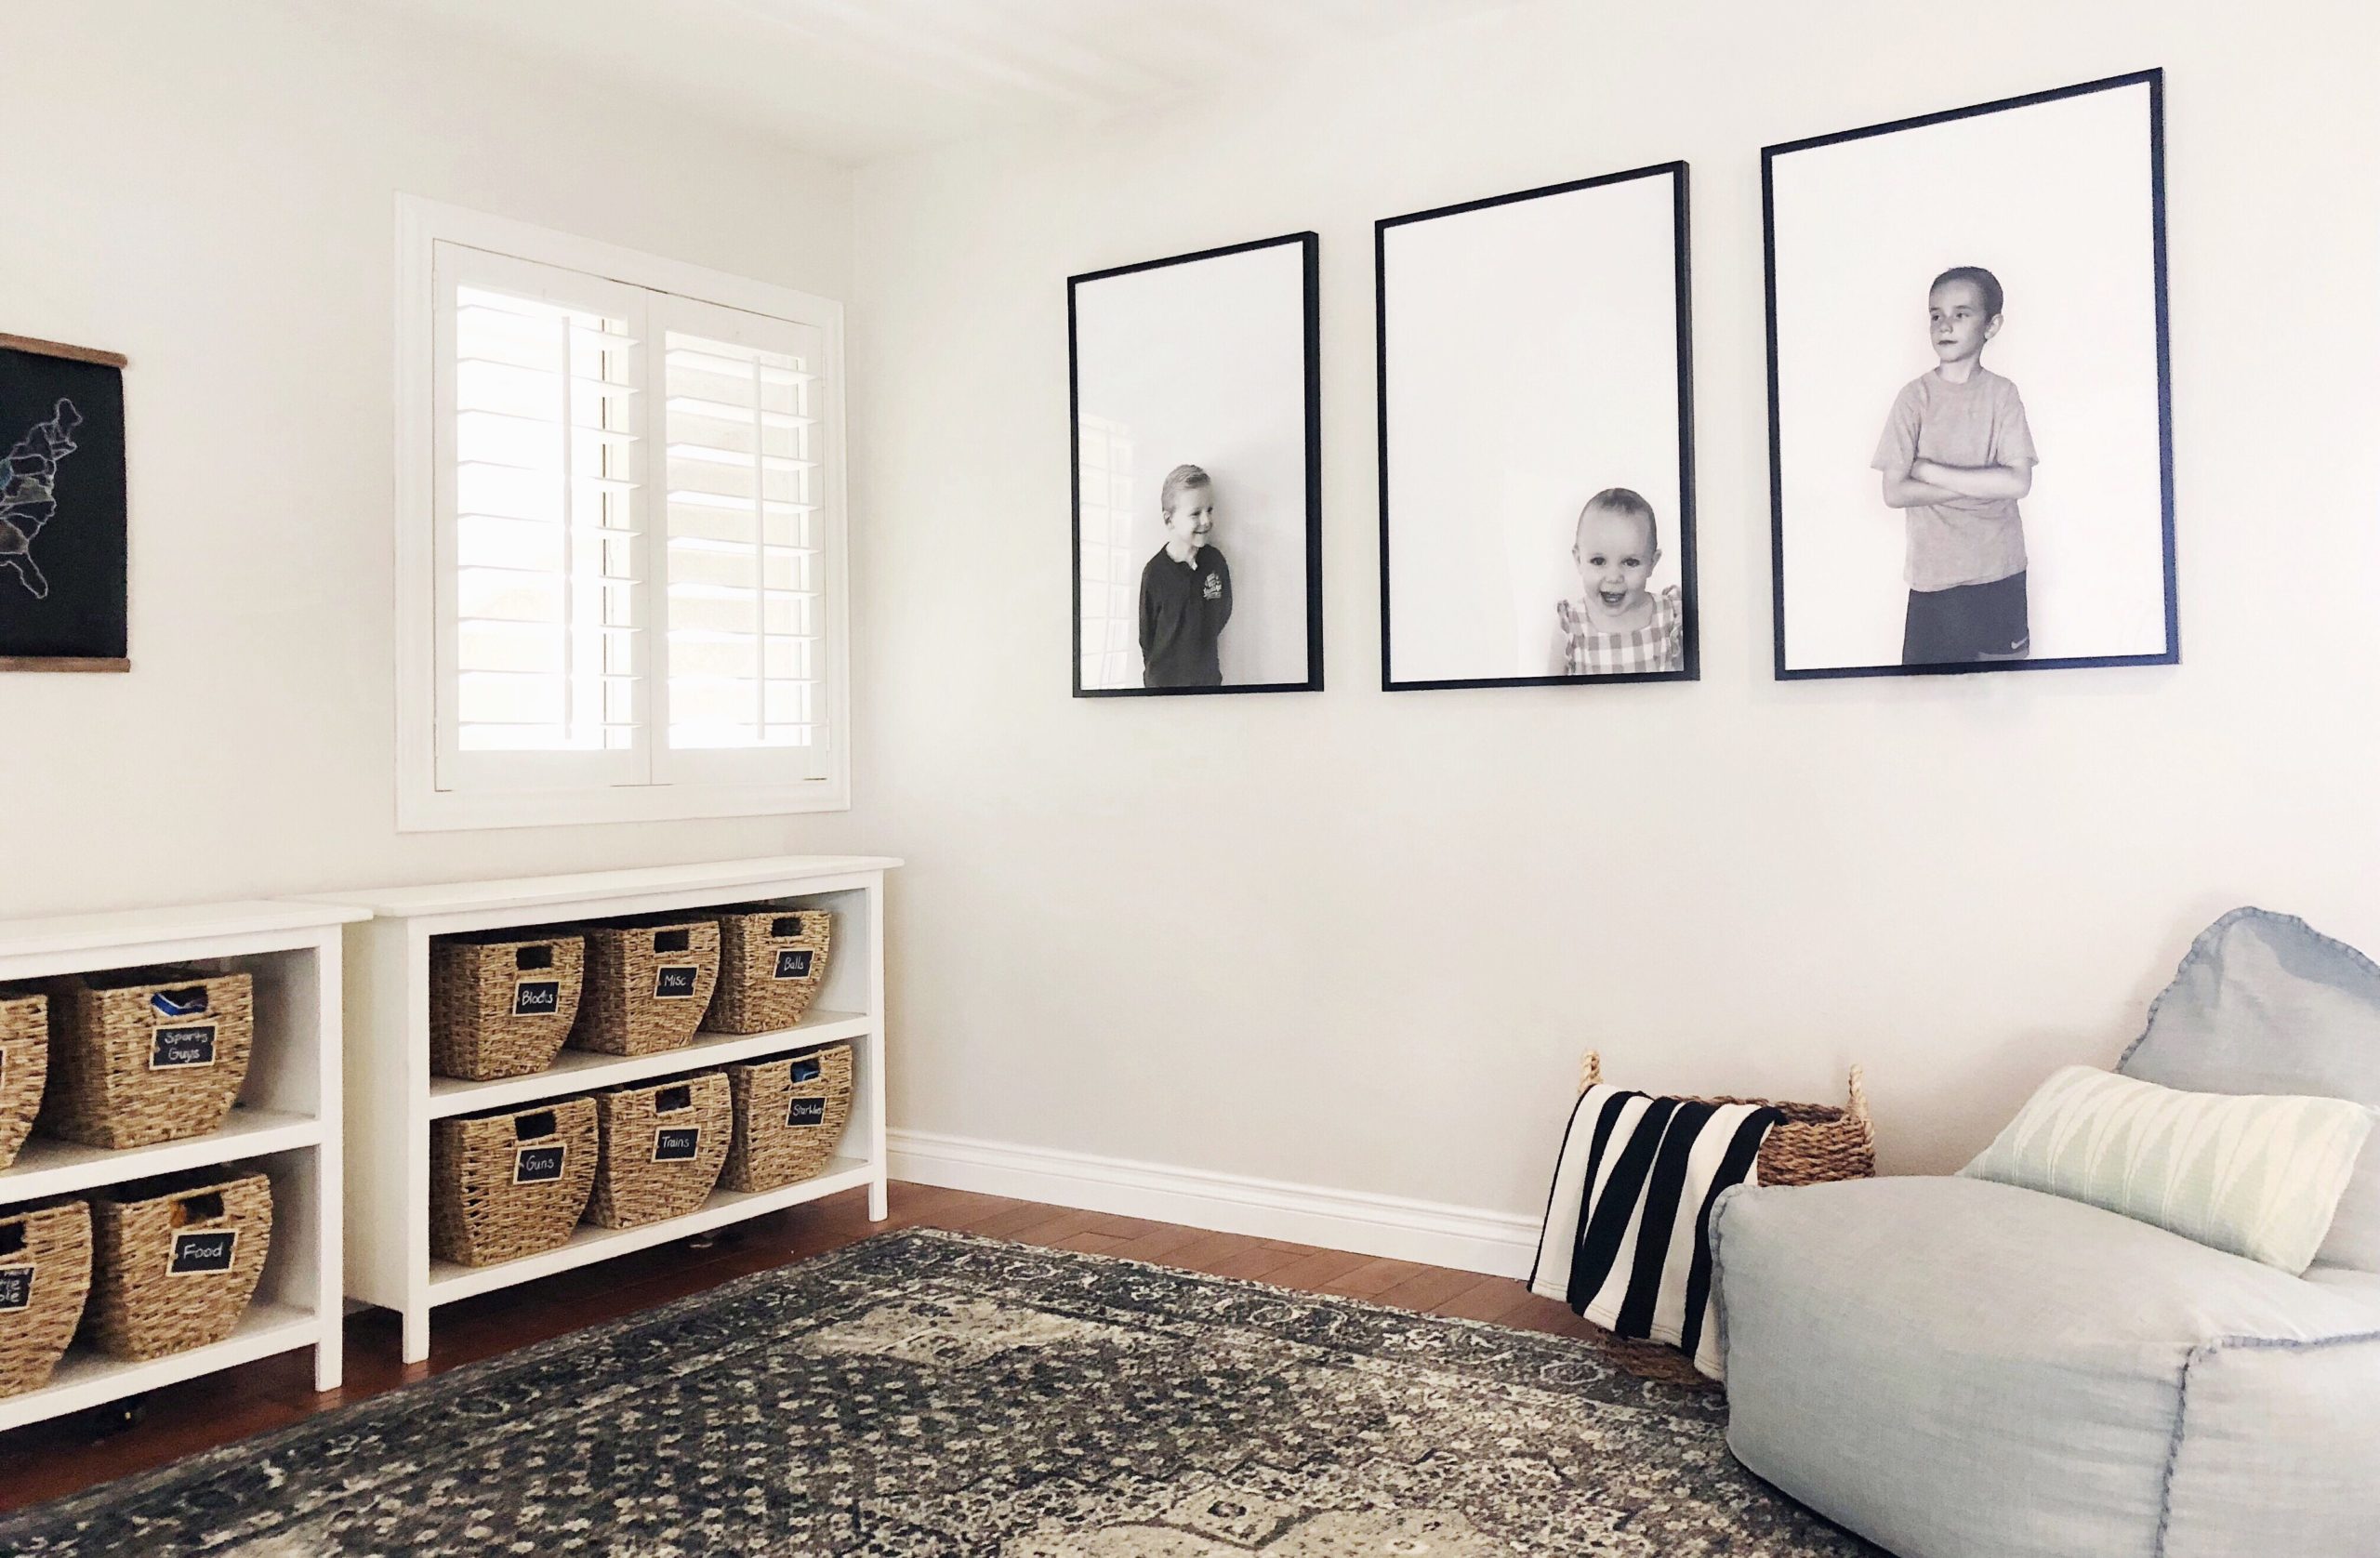 Affordable, Large-Scale Wall Portraits for $3! - Angela Rose Home